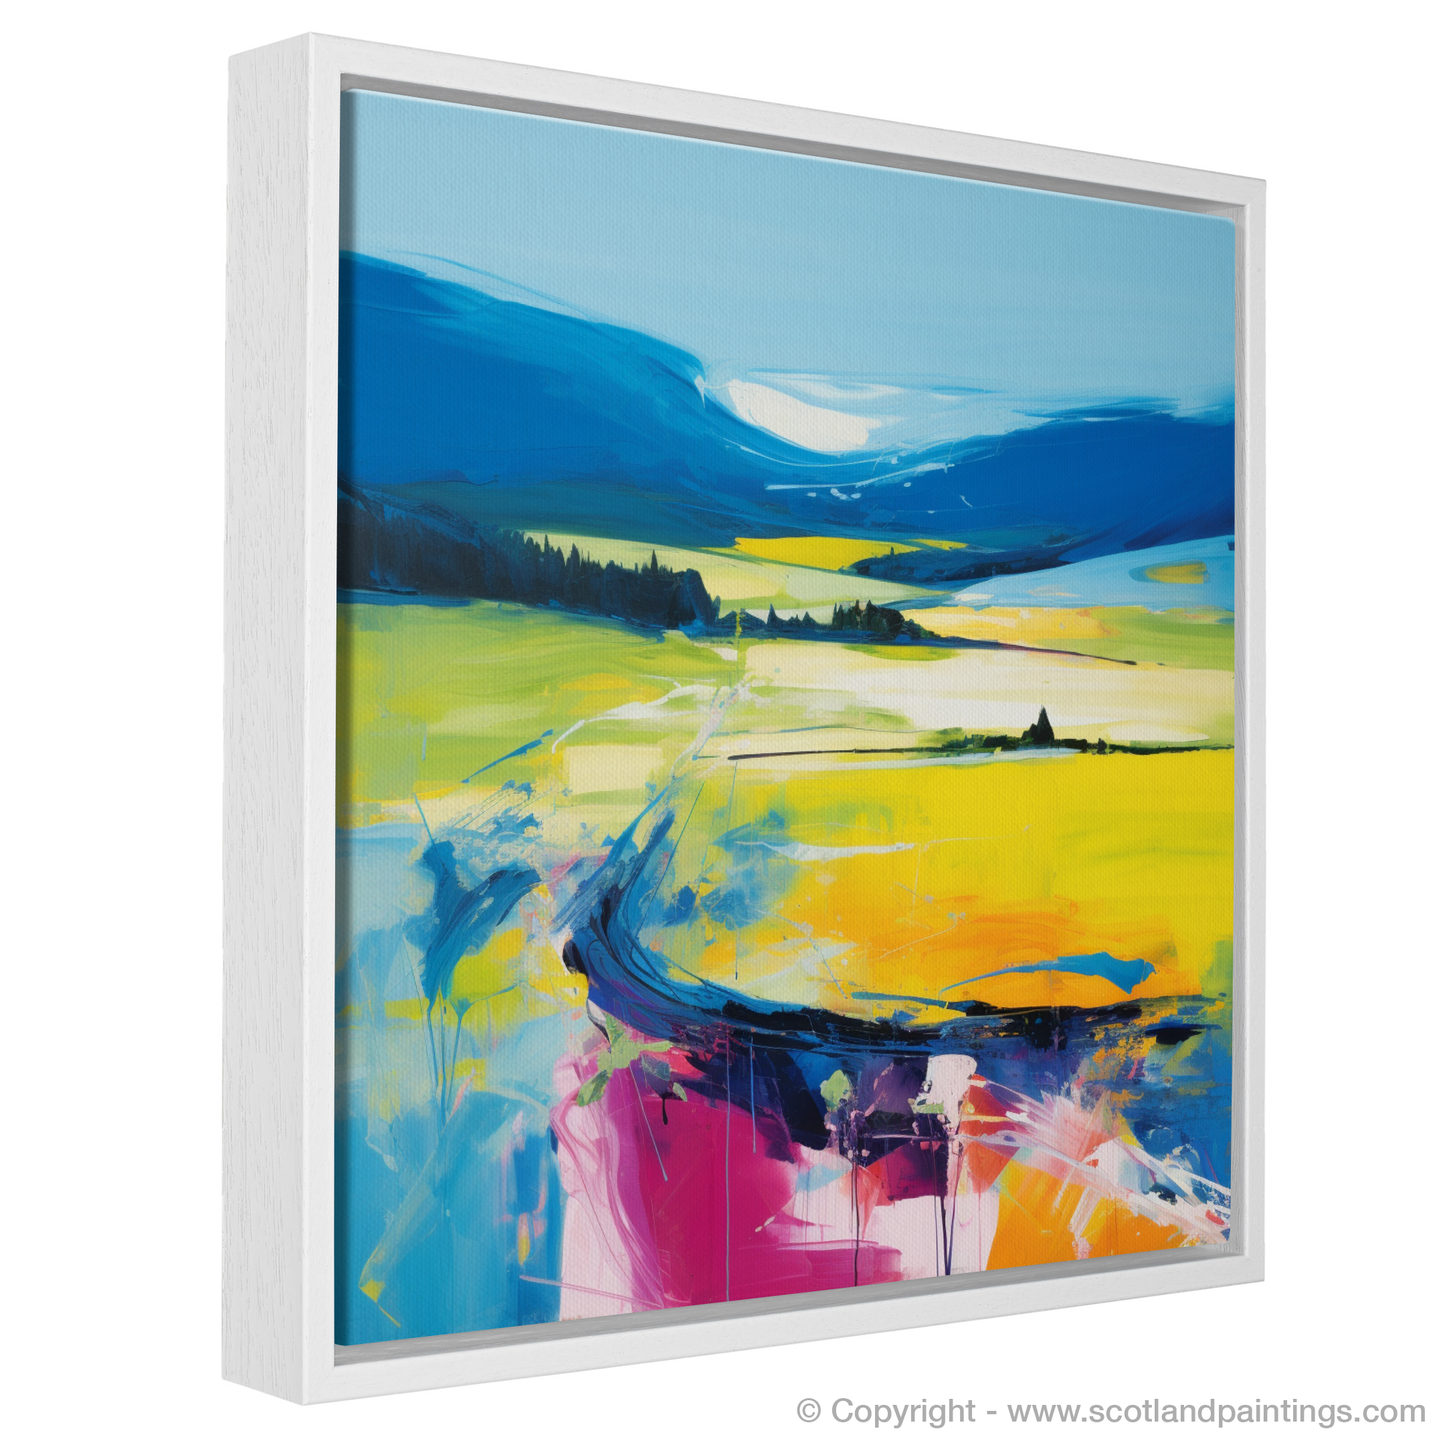 Painting and Art Print of Glenlivet, Moray in summer entitled "Summer Splendour of Glenlivet Moray".